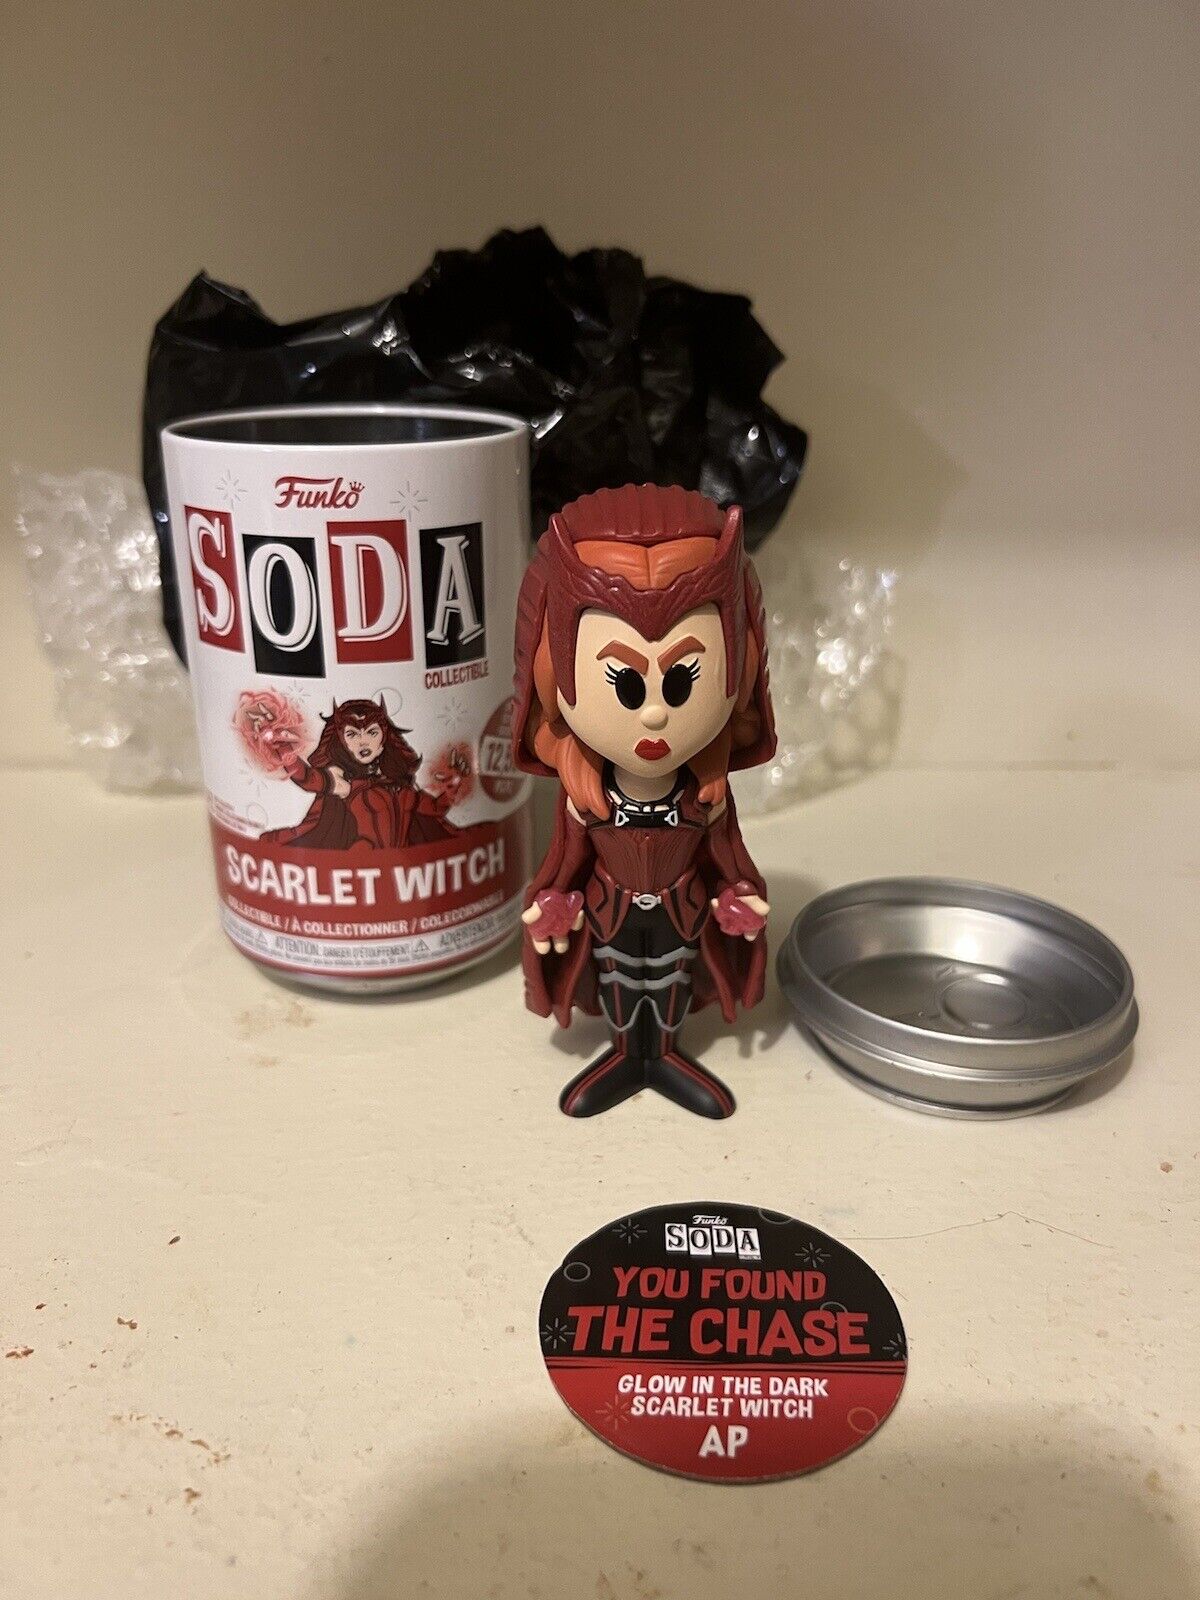 EXTREMELY RARE AP (ARTIST PROOF) CHASE GLOW Scarlet Witch Funko Soda Marvel MCU